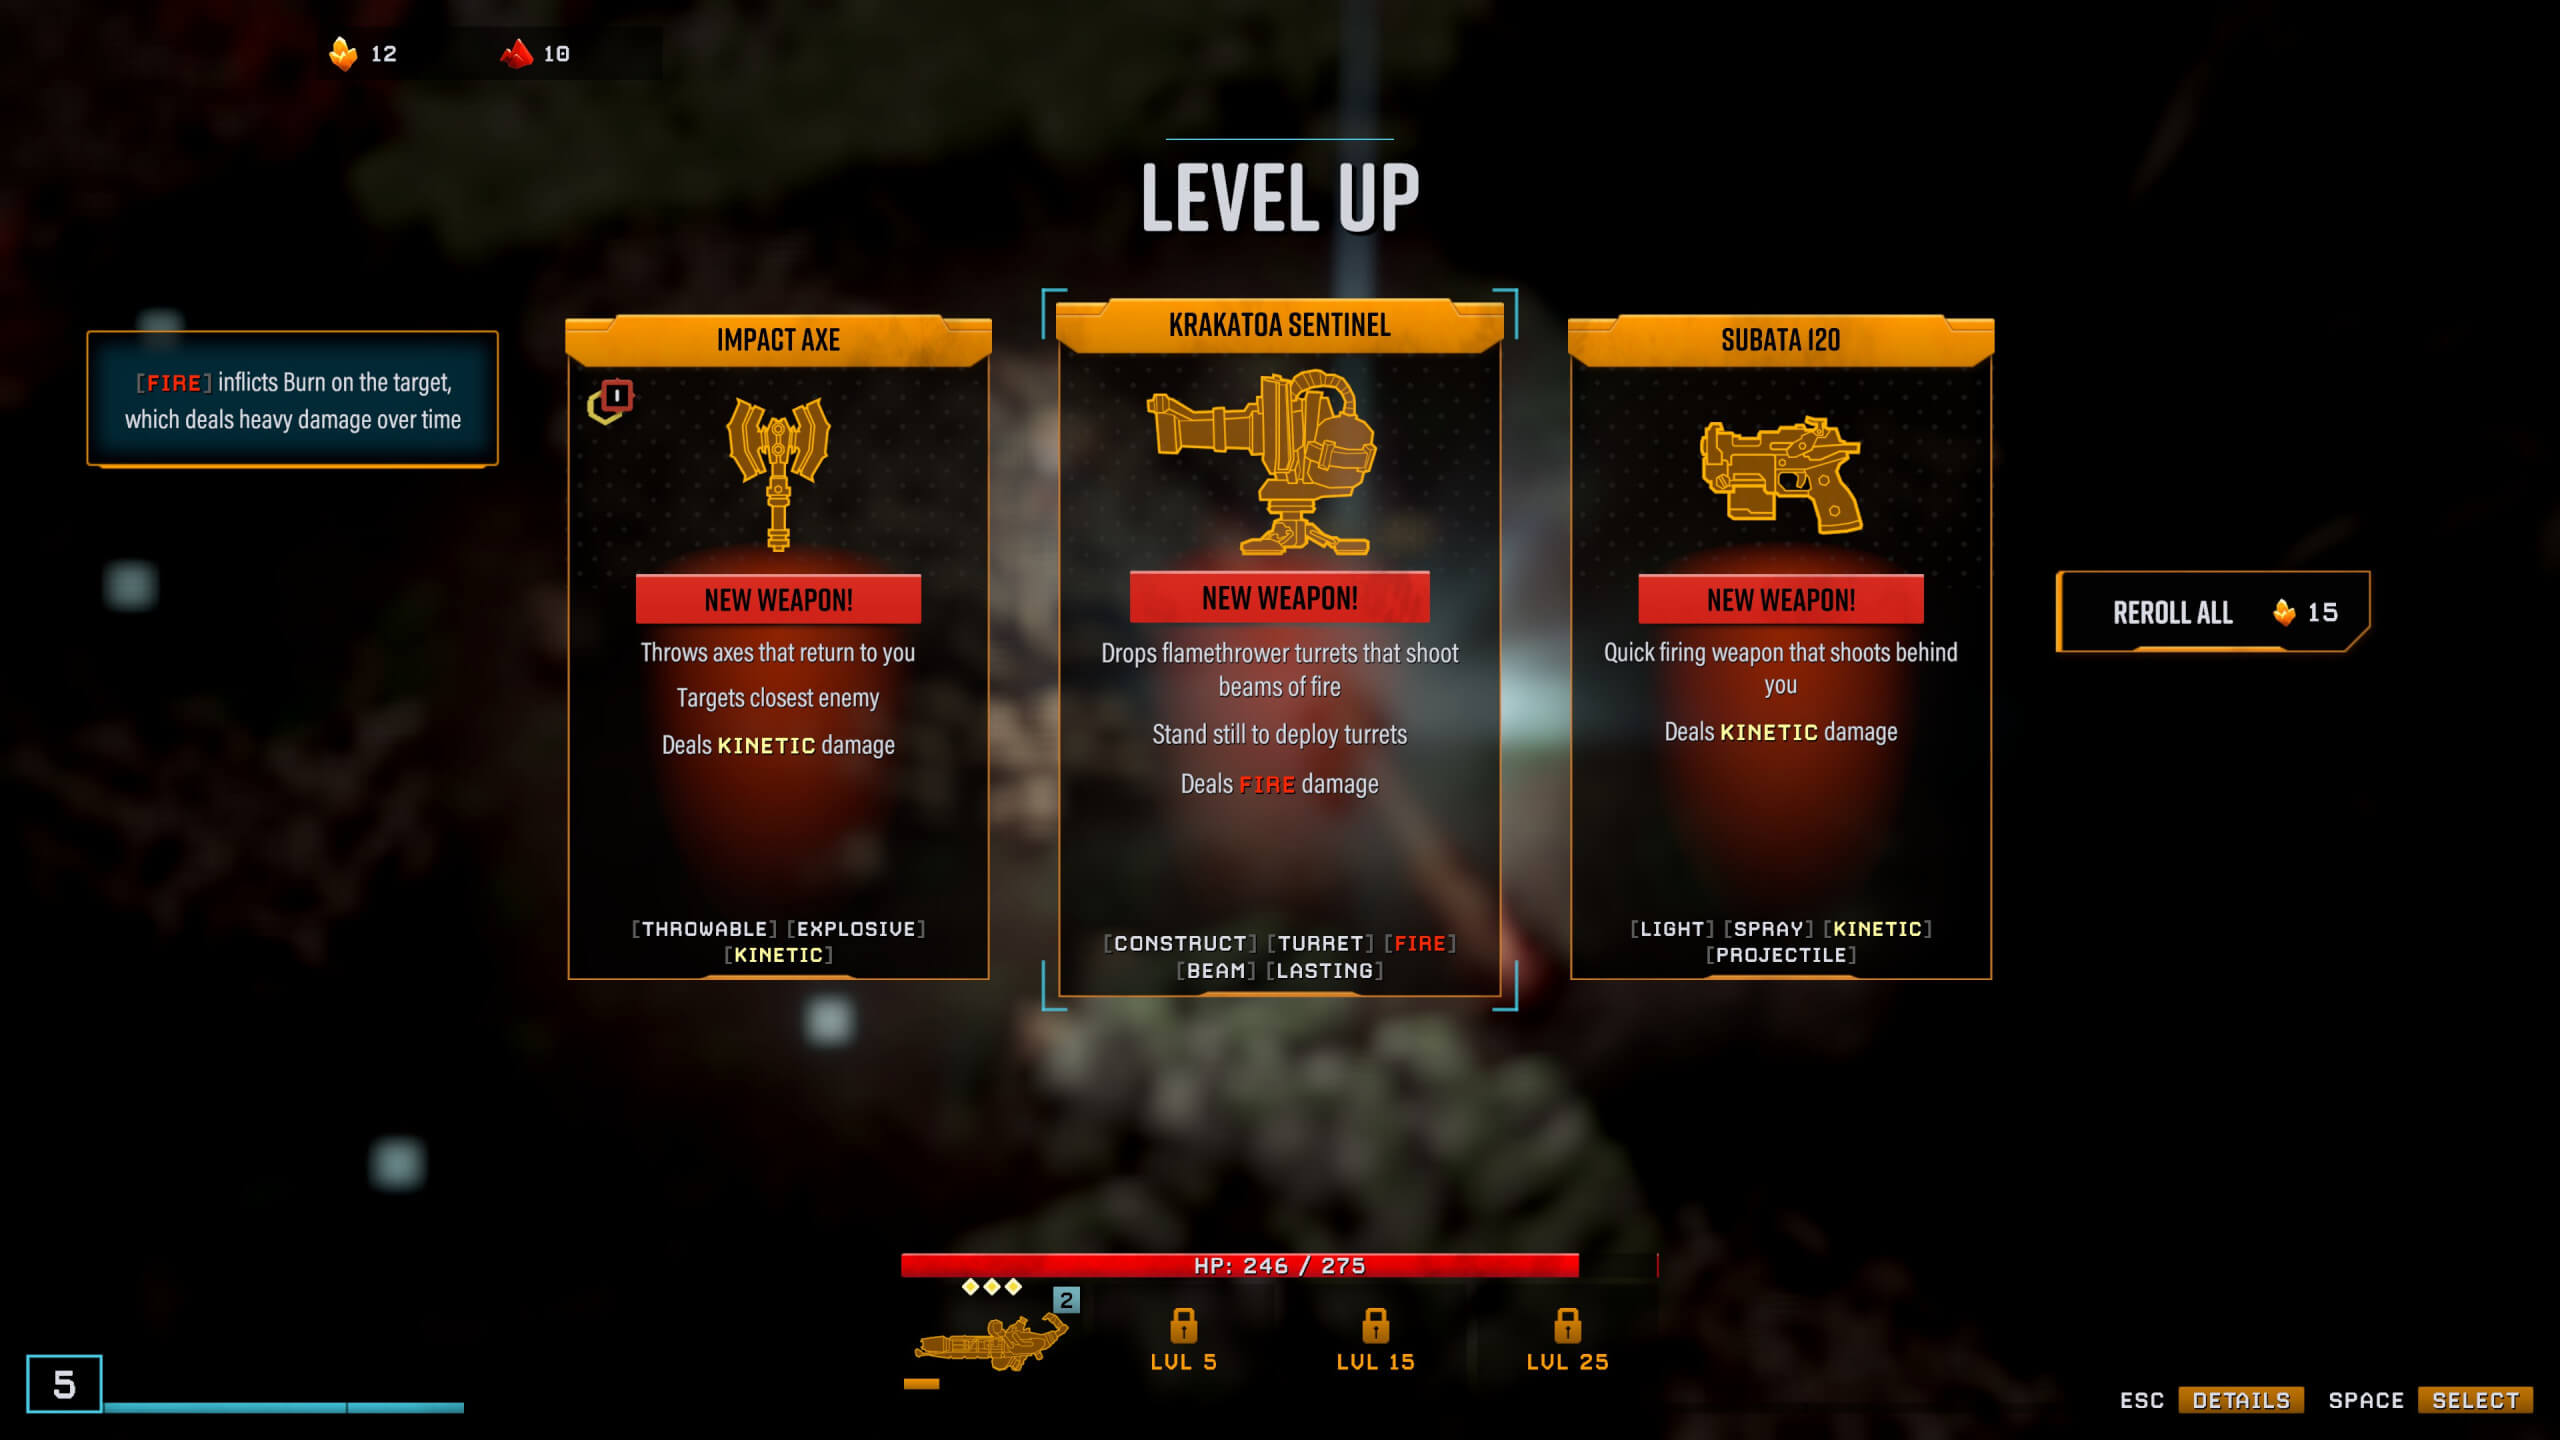 The level up screen and three options for weapon choice at that level are shown. Each weapon provides a description of how it operates and different attributes, such as the middle being for a turret that the player must pause to place.